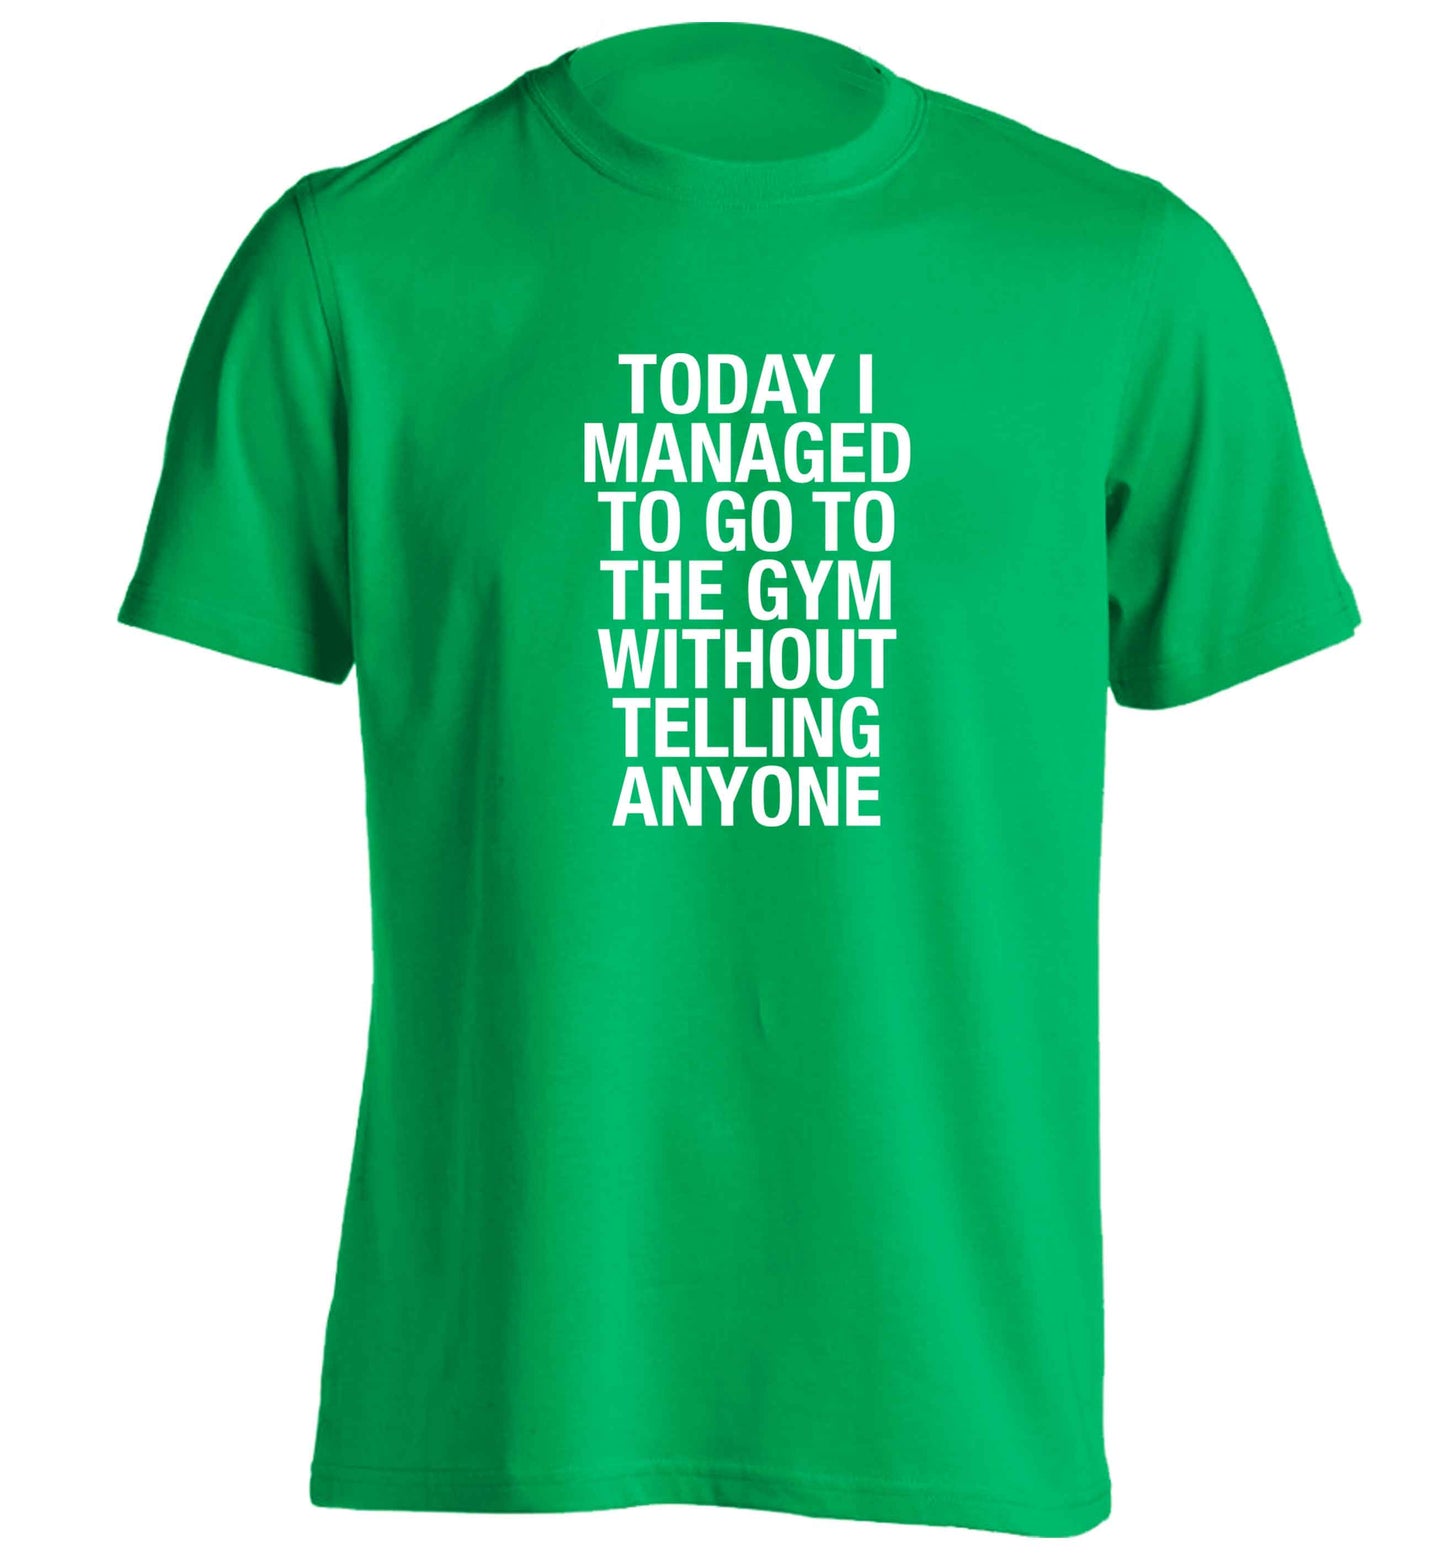 Today I managed to go to the gym without telling anyone adults unisex green Tshirt 2XL